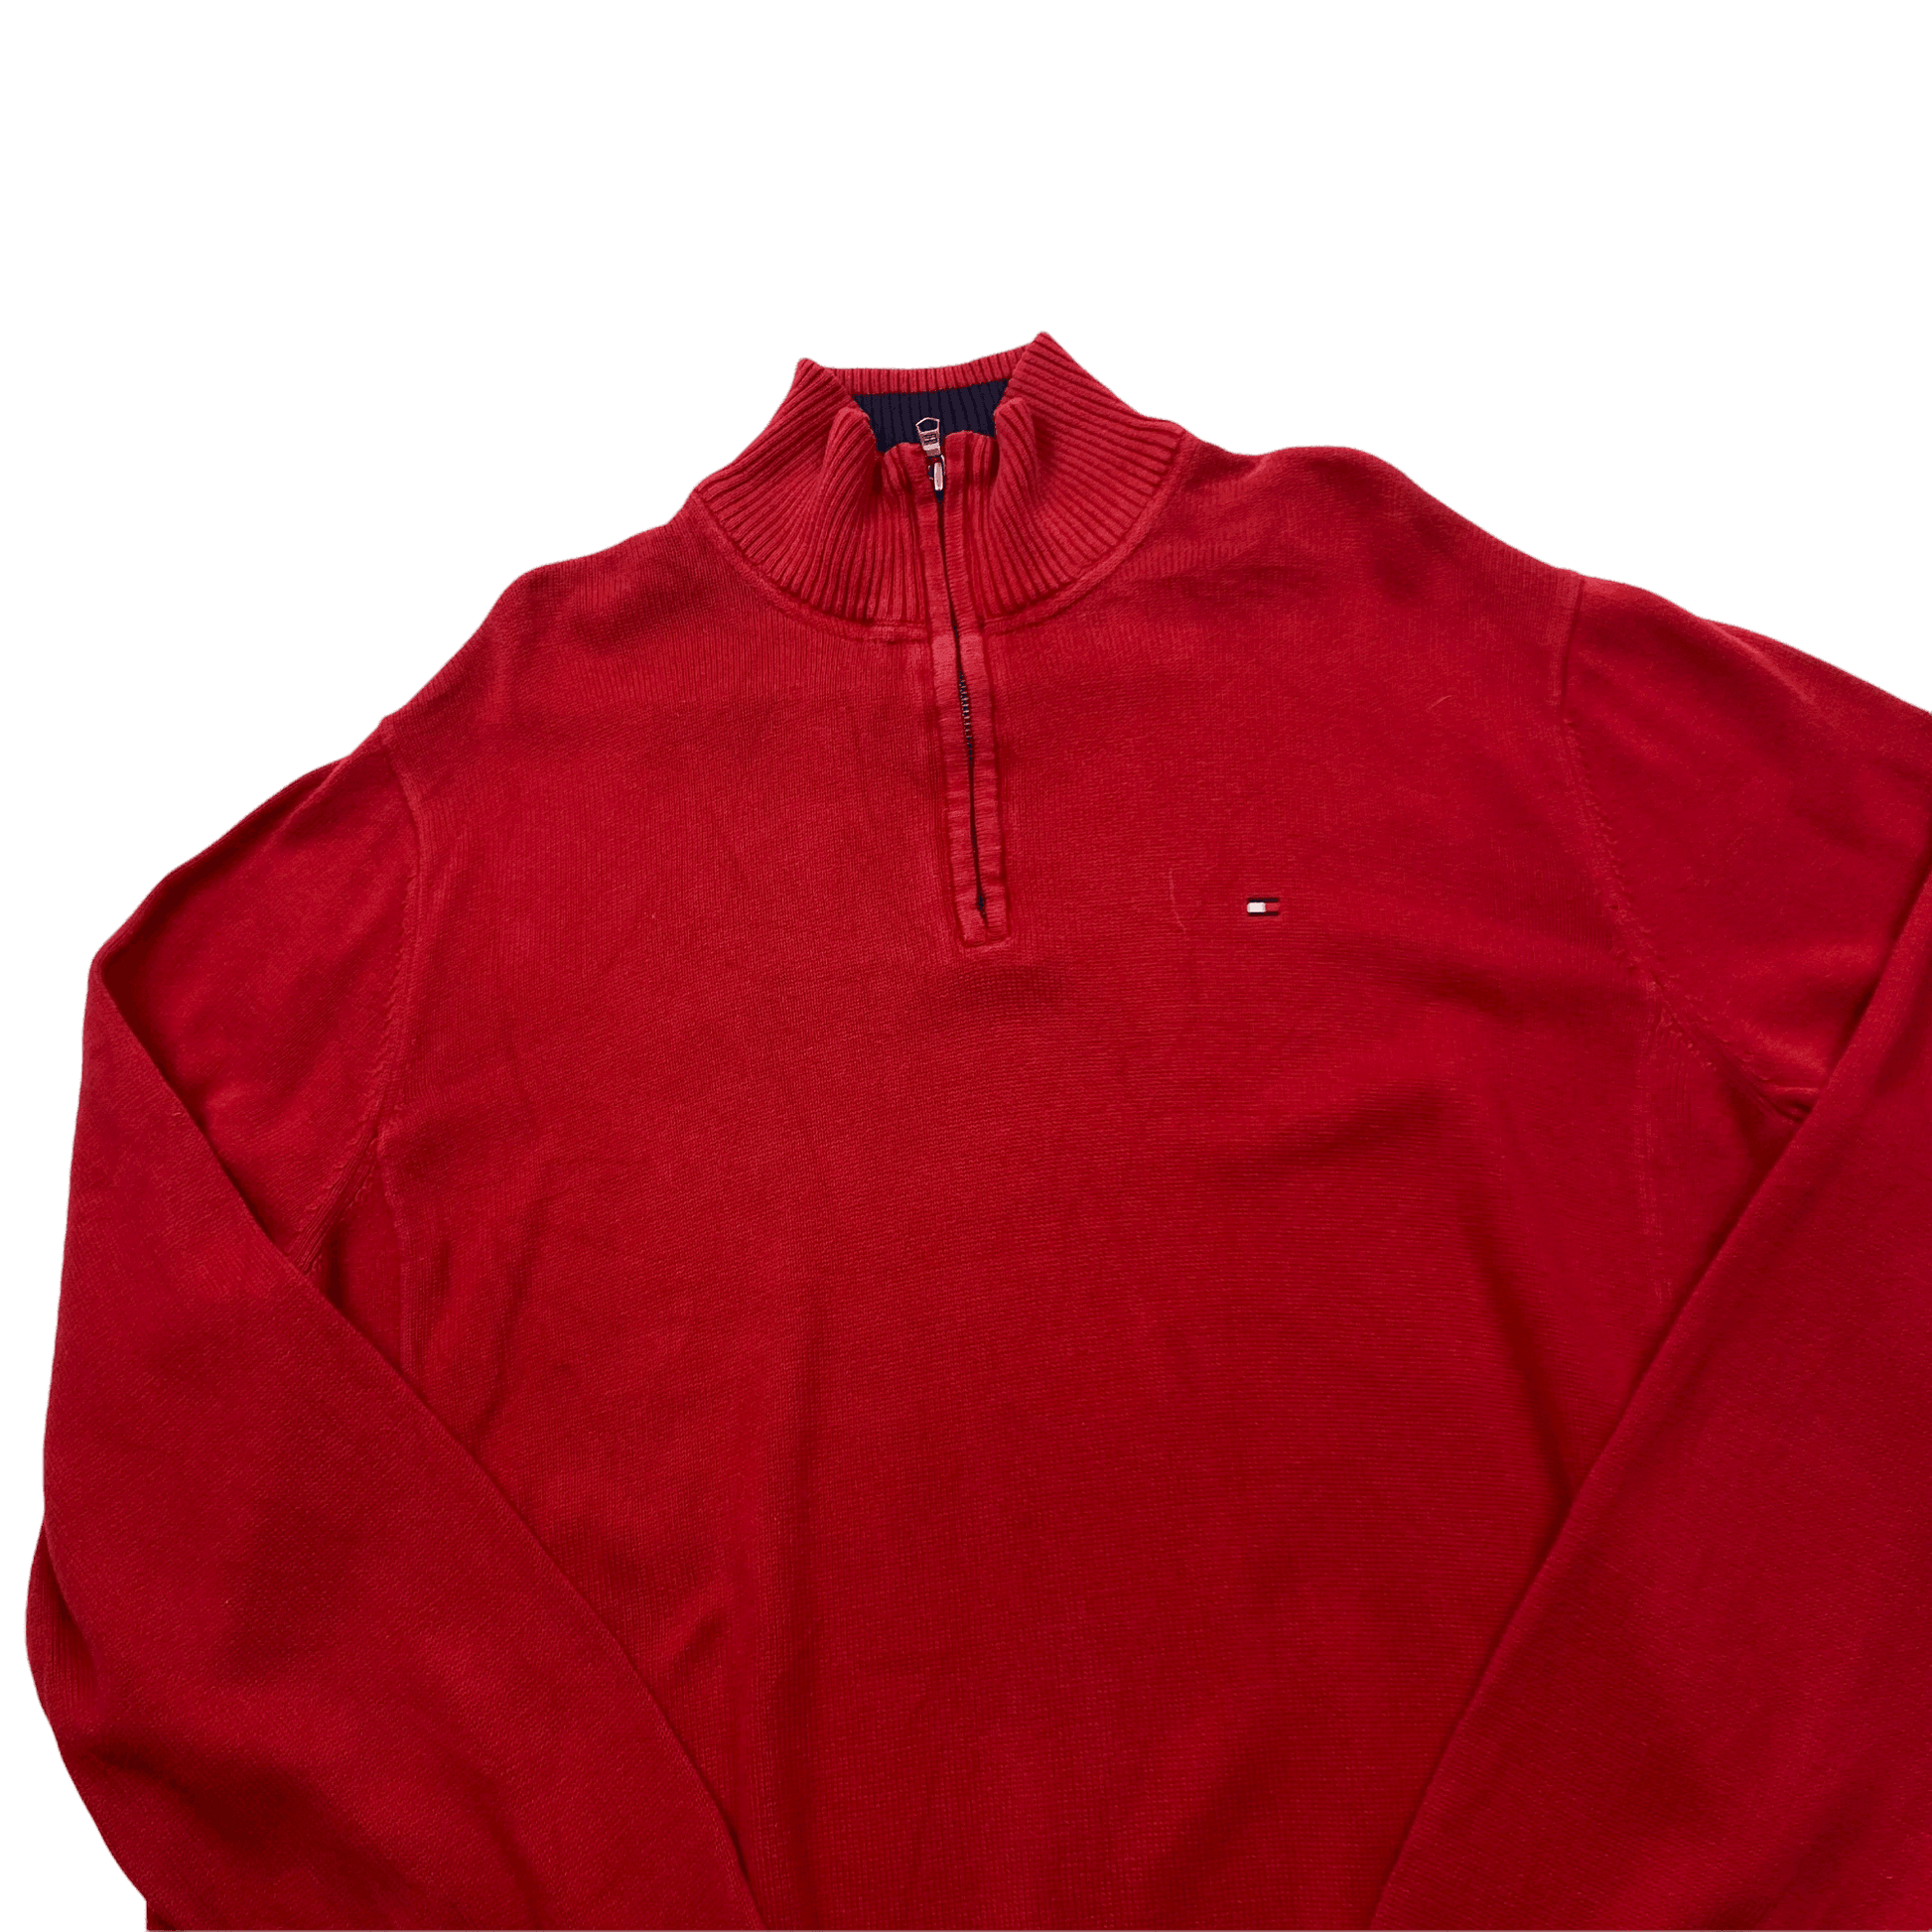 Vintage 90s Red Tommy Hilfiger Quarter Zip Knitted Sweatshirt - Extra Large - The Streetwear Studio